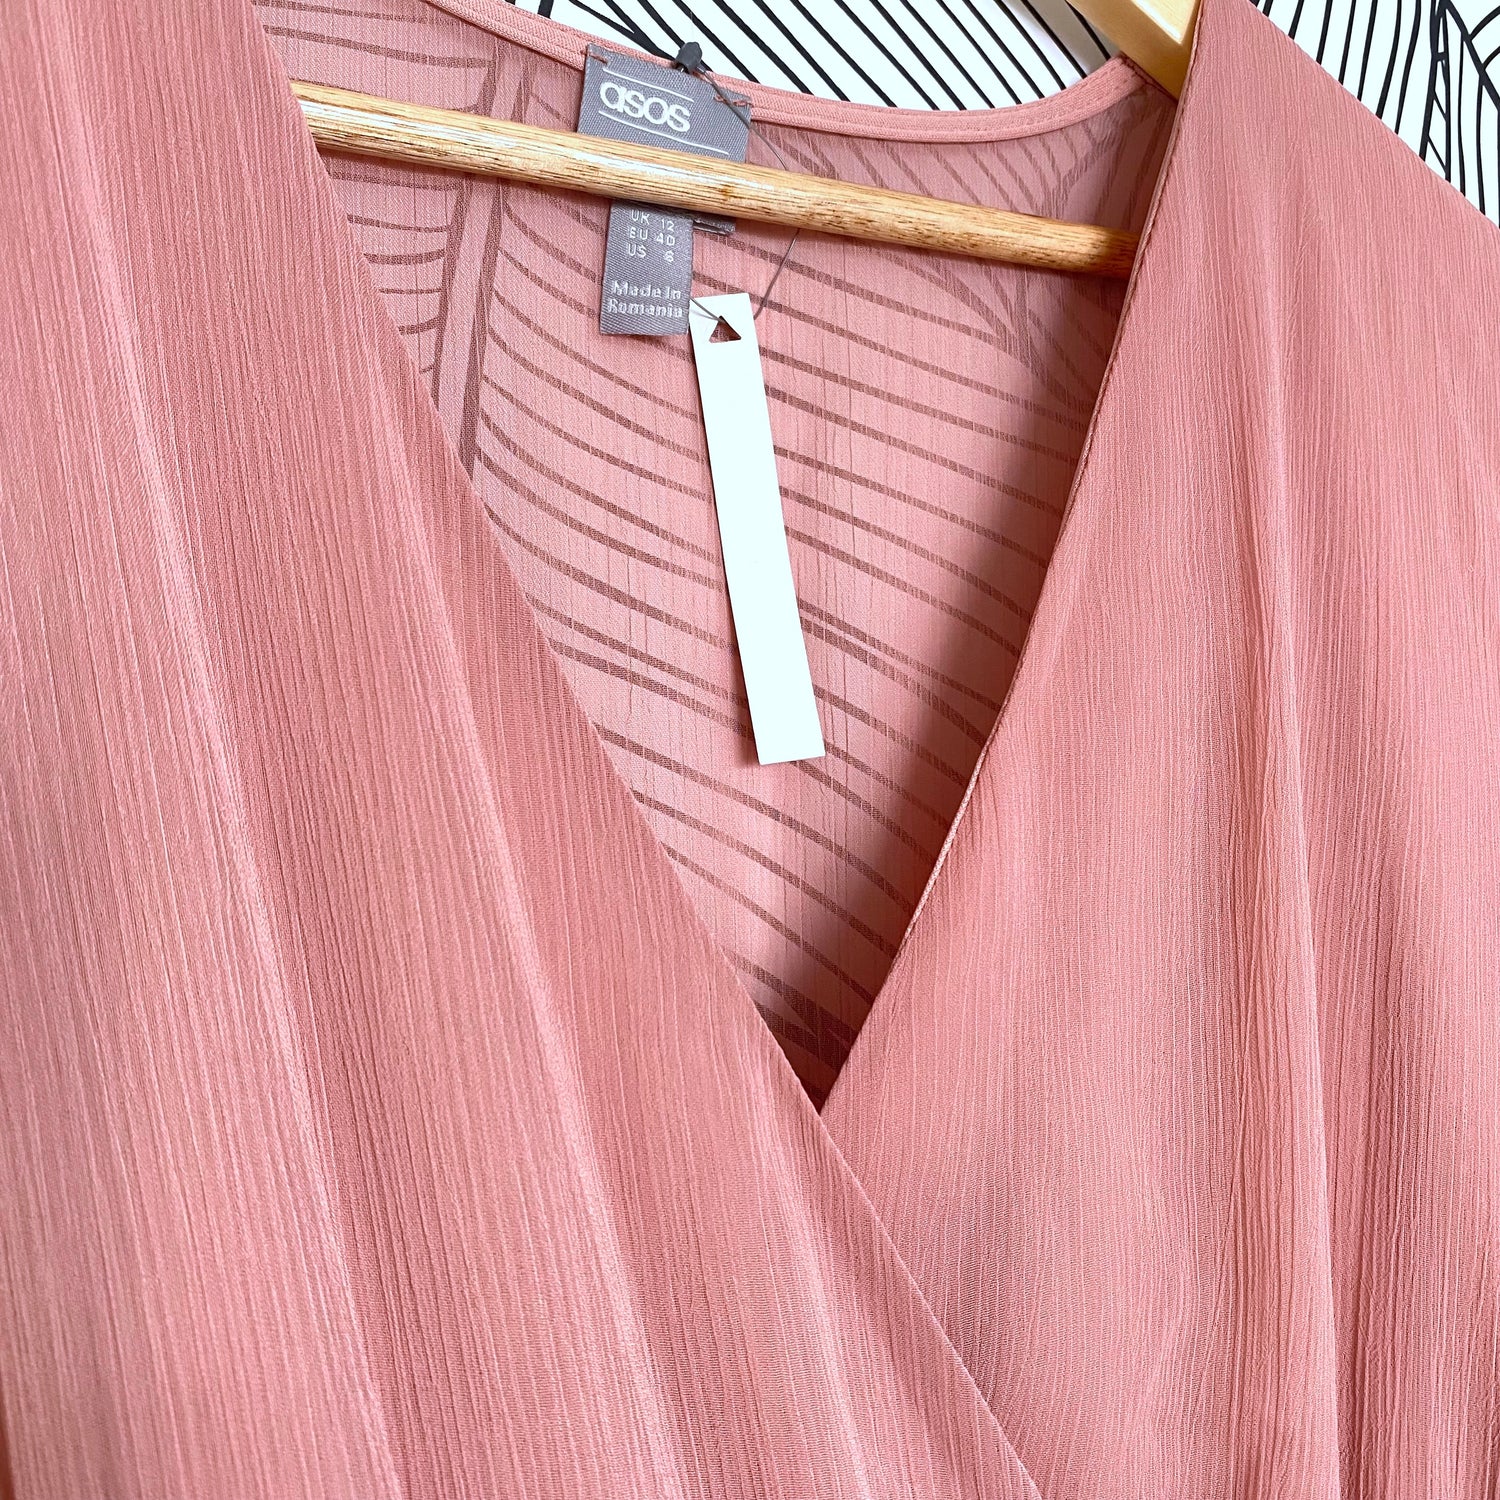 ASOS label of a pink dress showing that it is a size medium